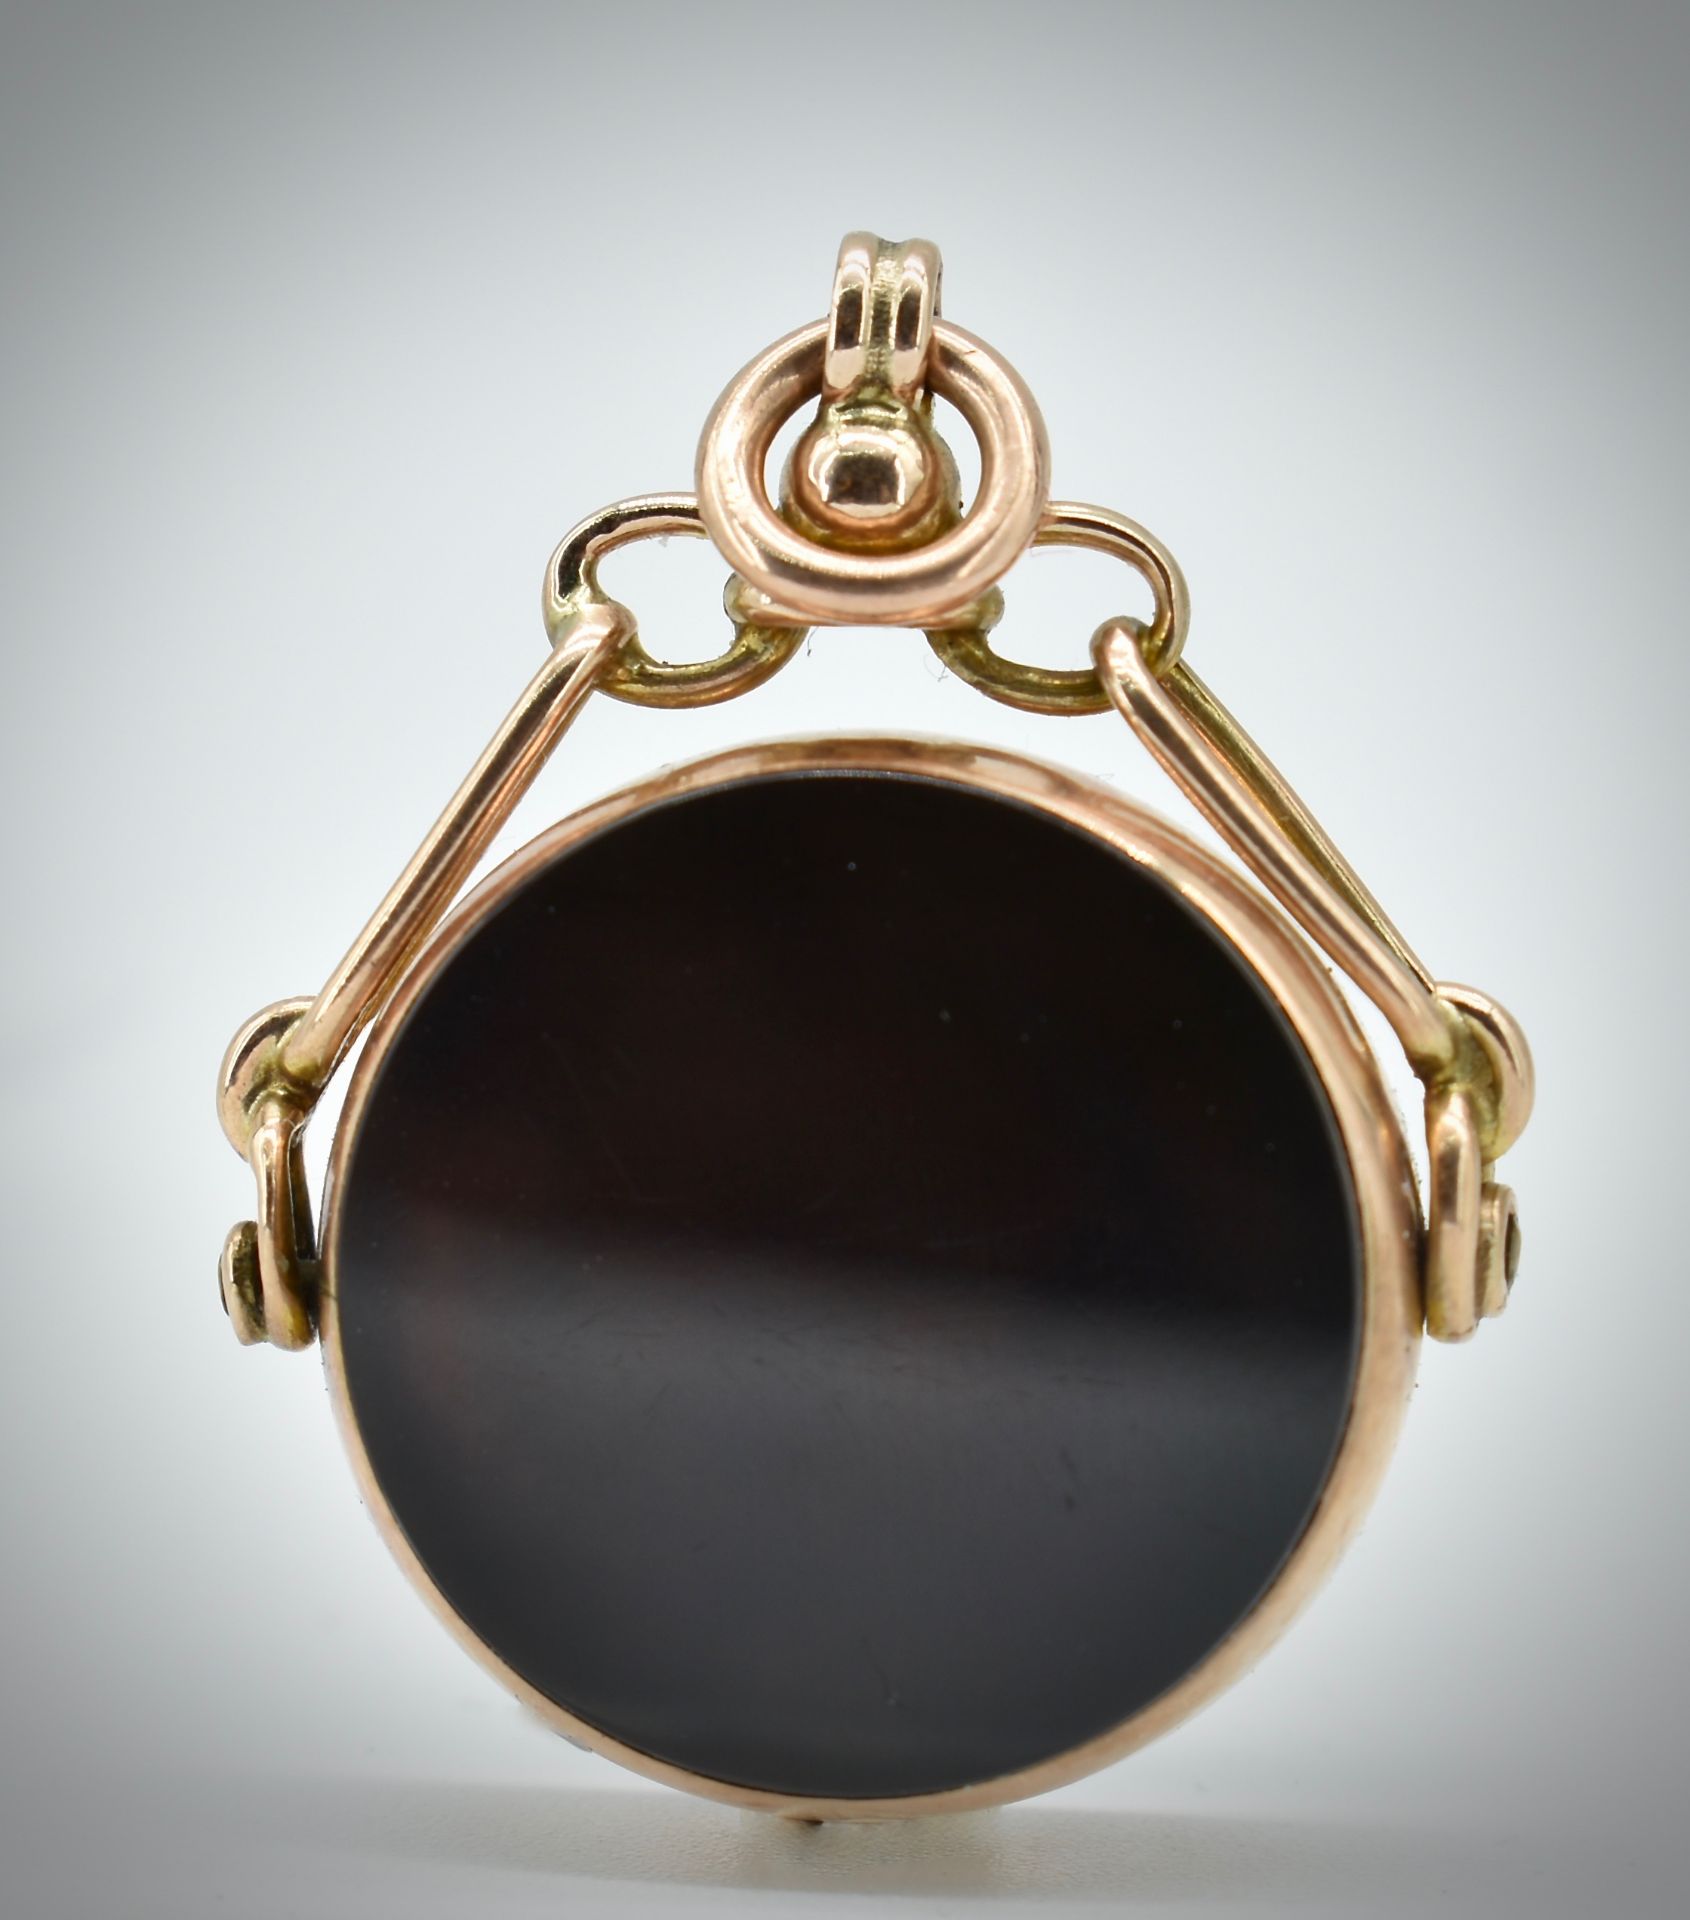 9ct Gold & Bloodstone Agate Fob Swivel - Image 3 of 5